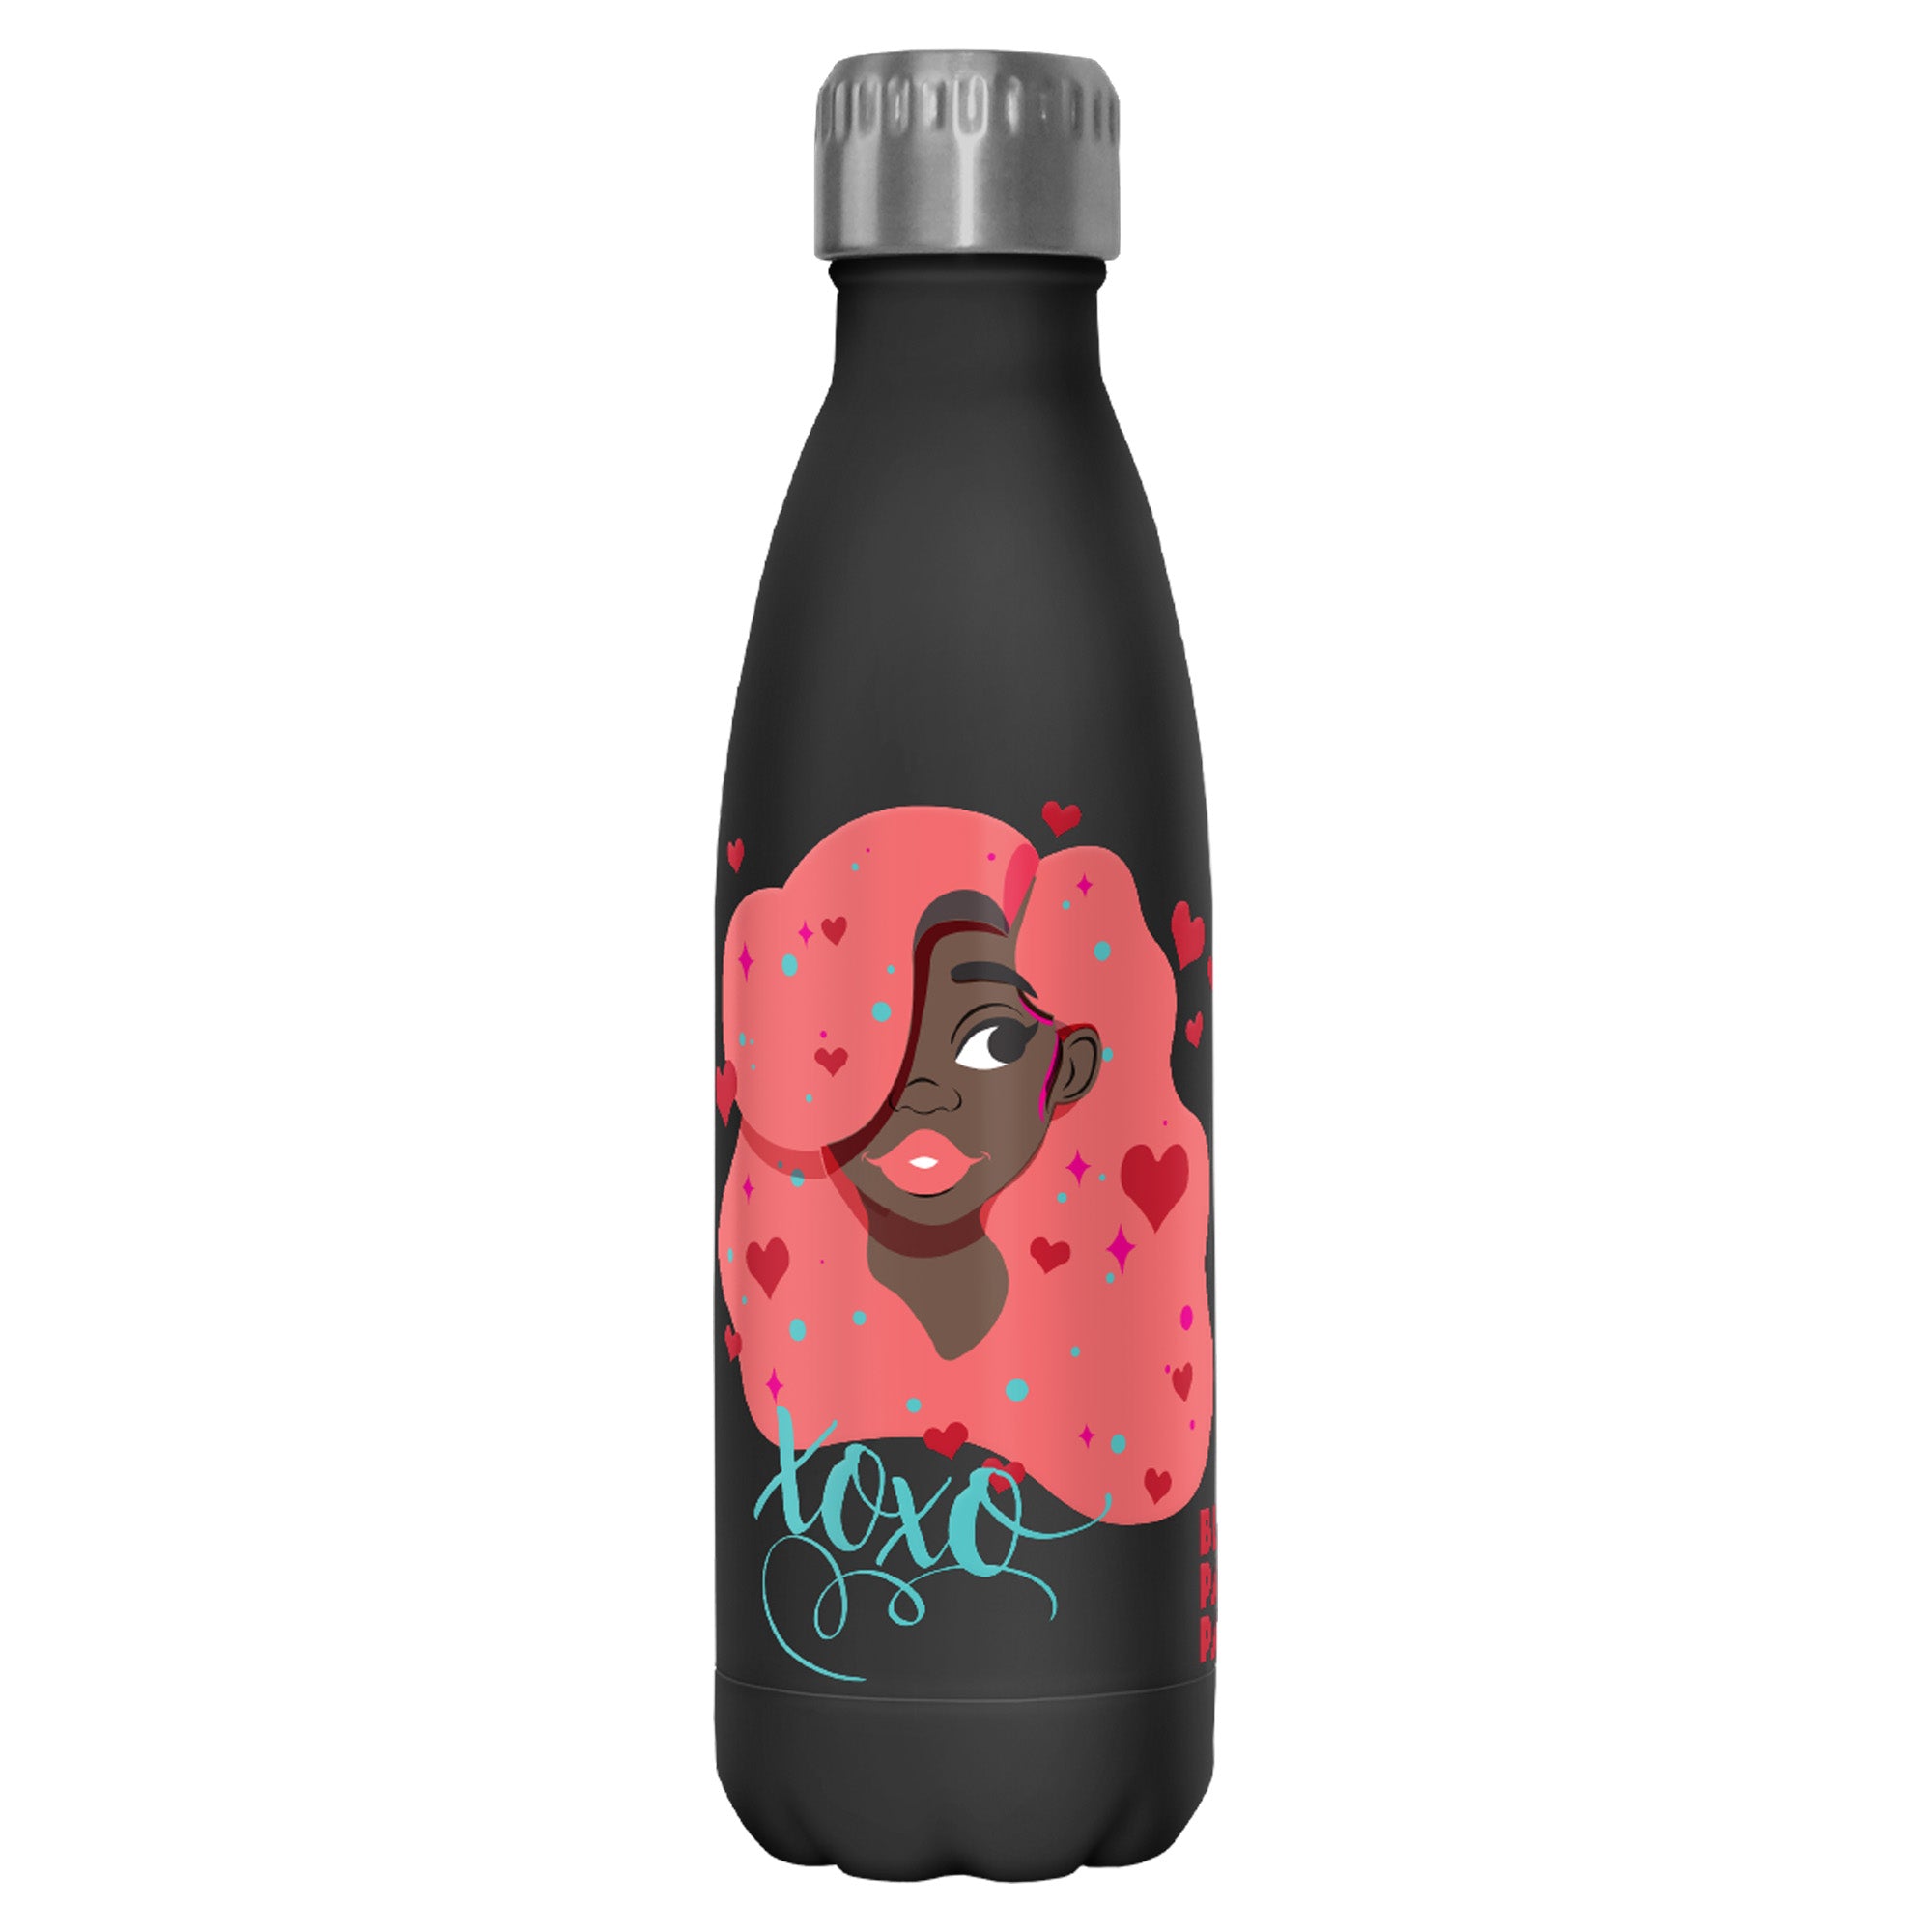 17 oz Stainless Steel Bottle Black Paper Party XOXO